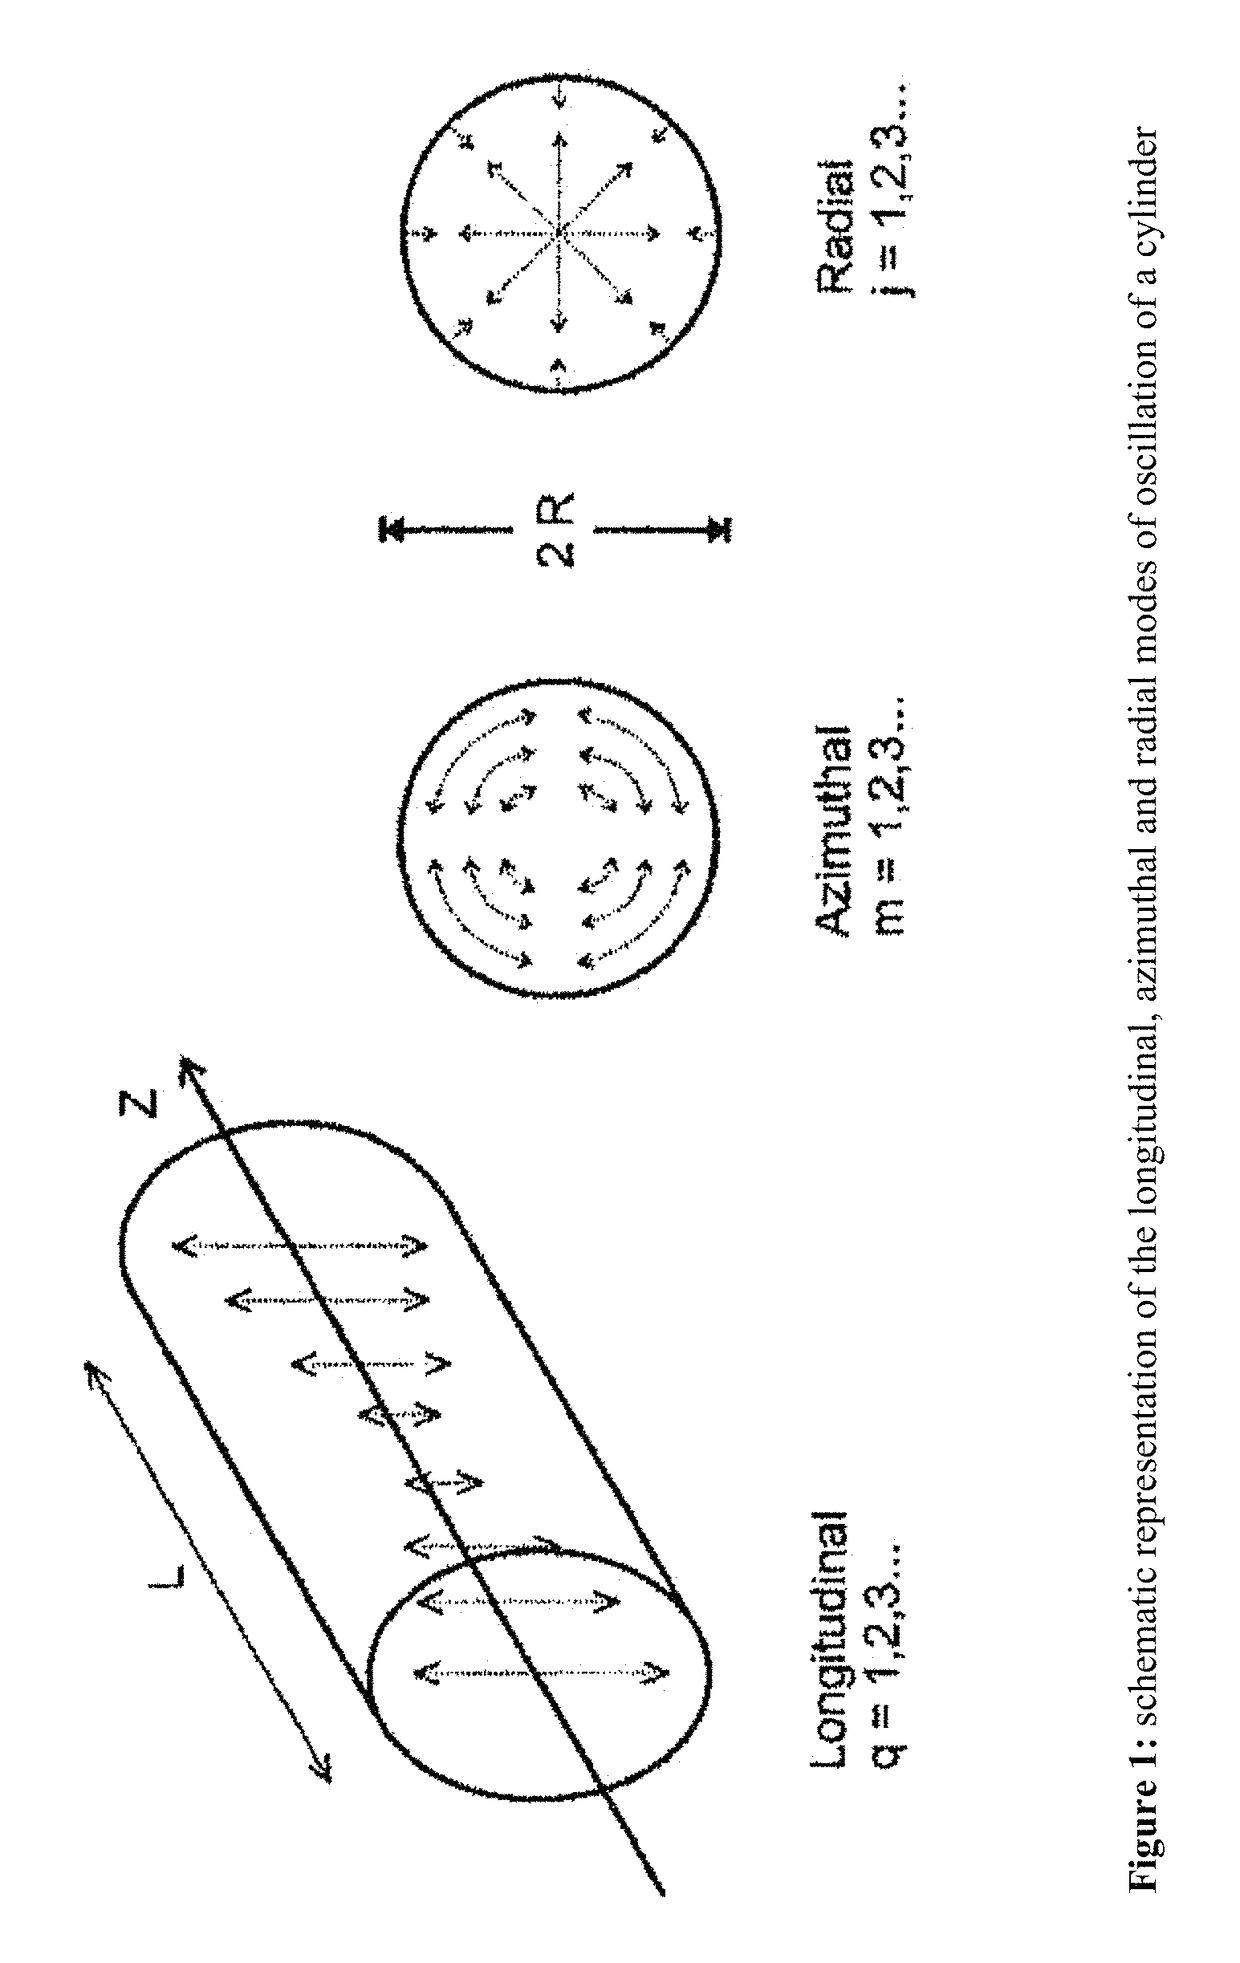 Azimuthally oscillating membrane emulsification for controlled droplet production